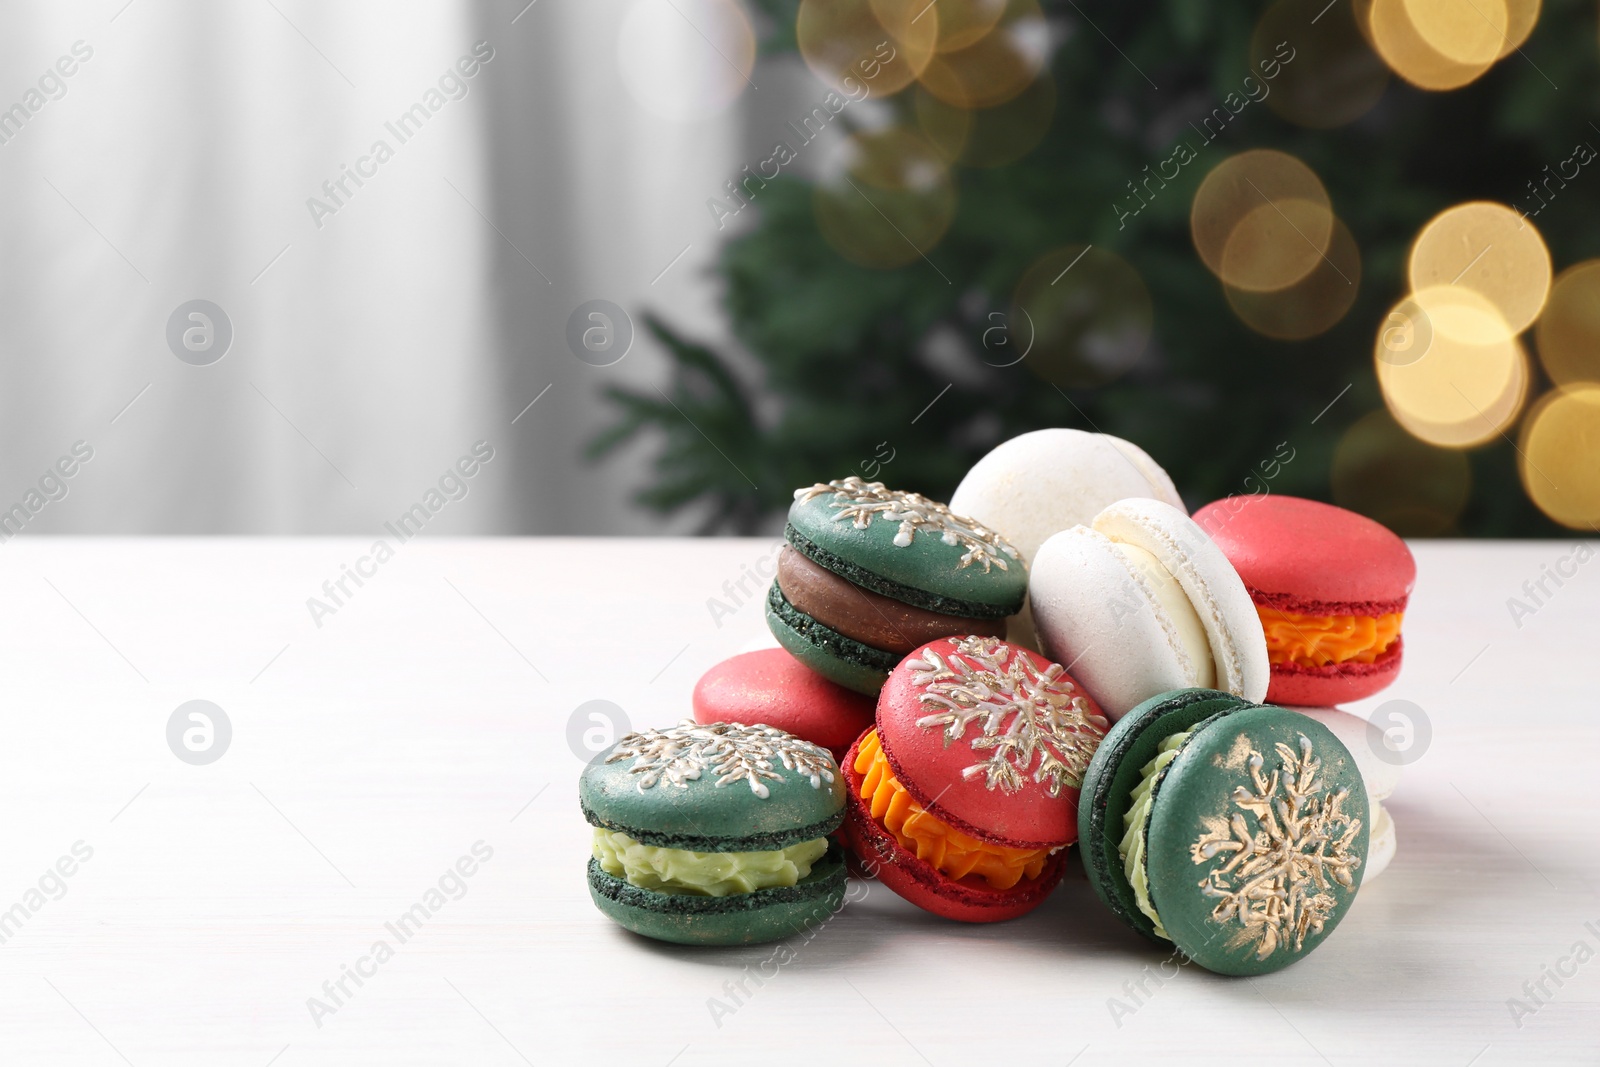 Photo of Different decorated Christmas macarons on white table indoors, space for text